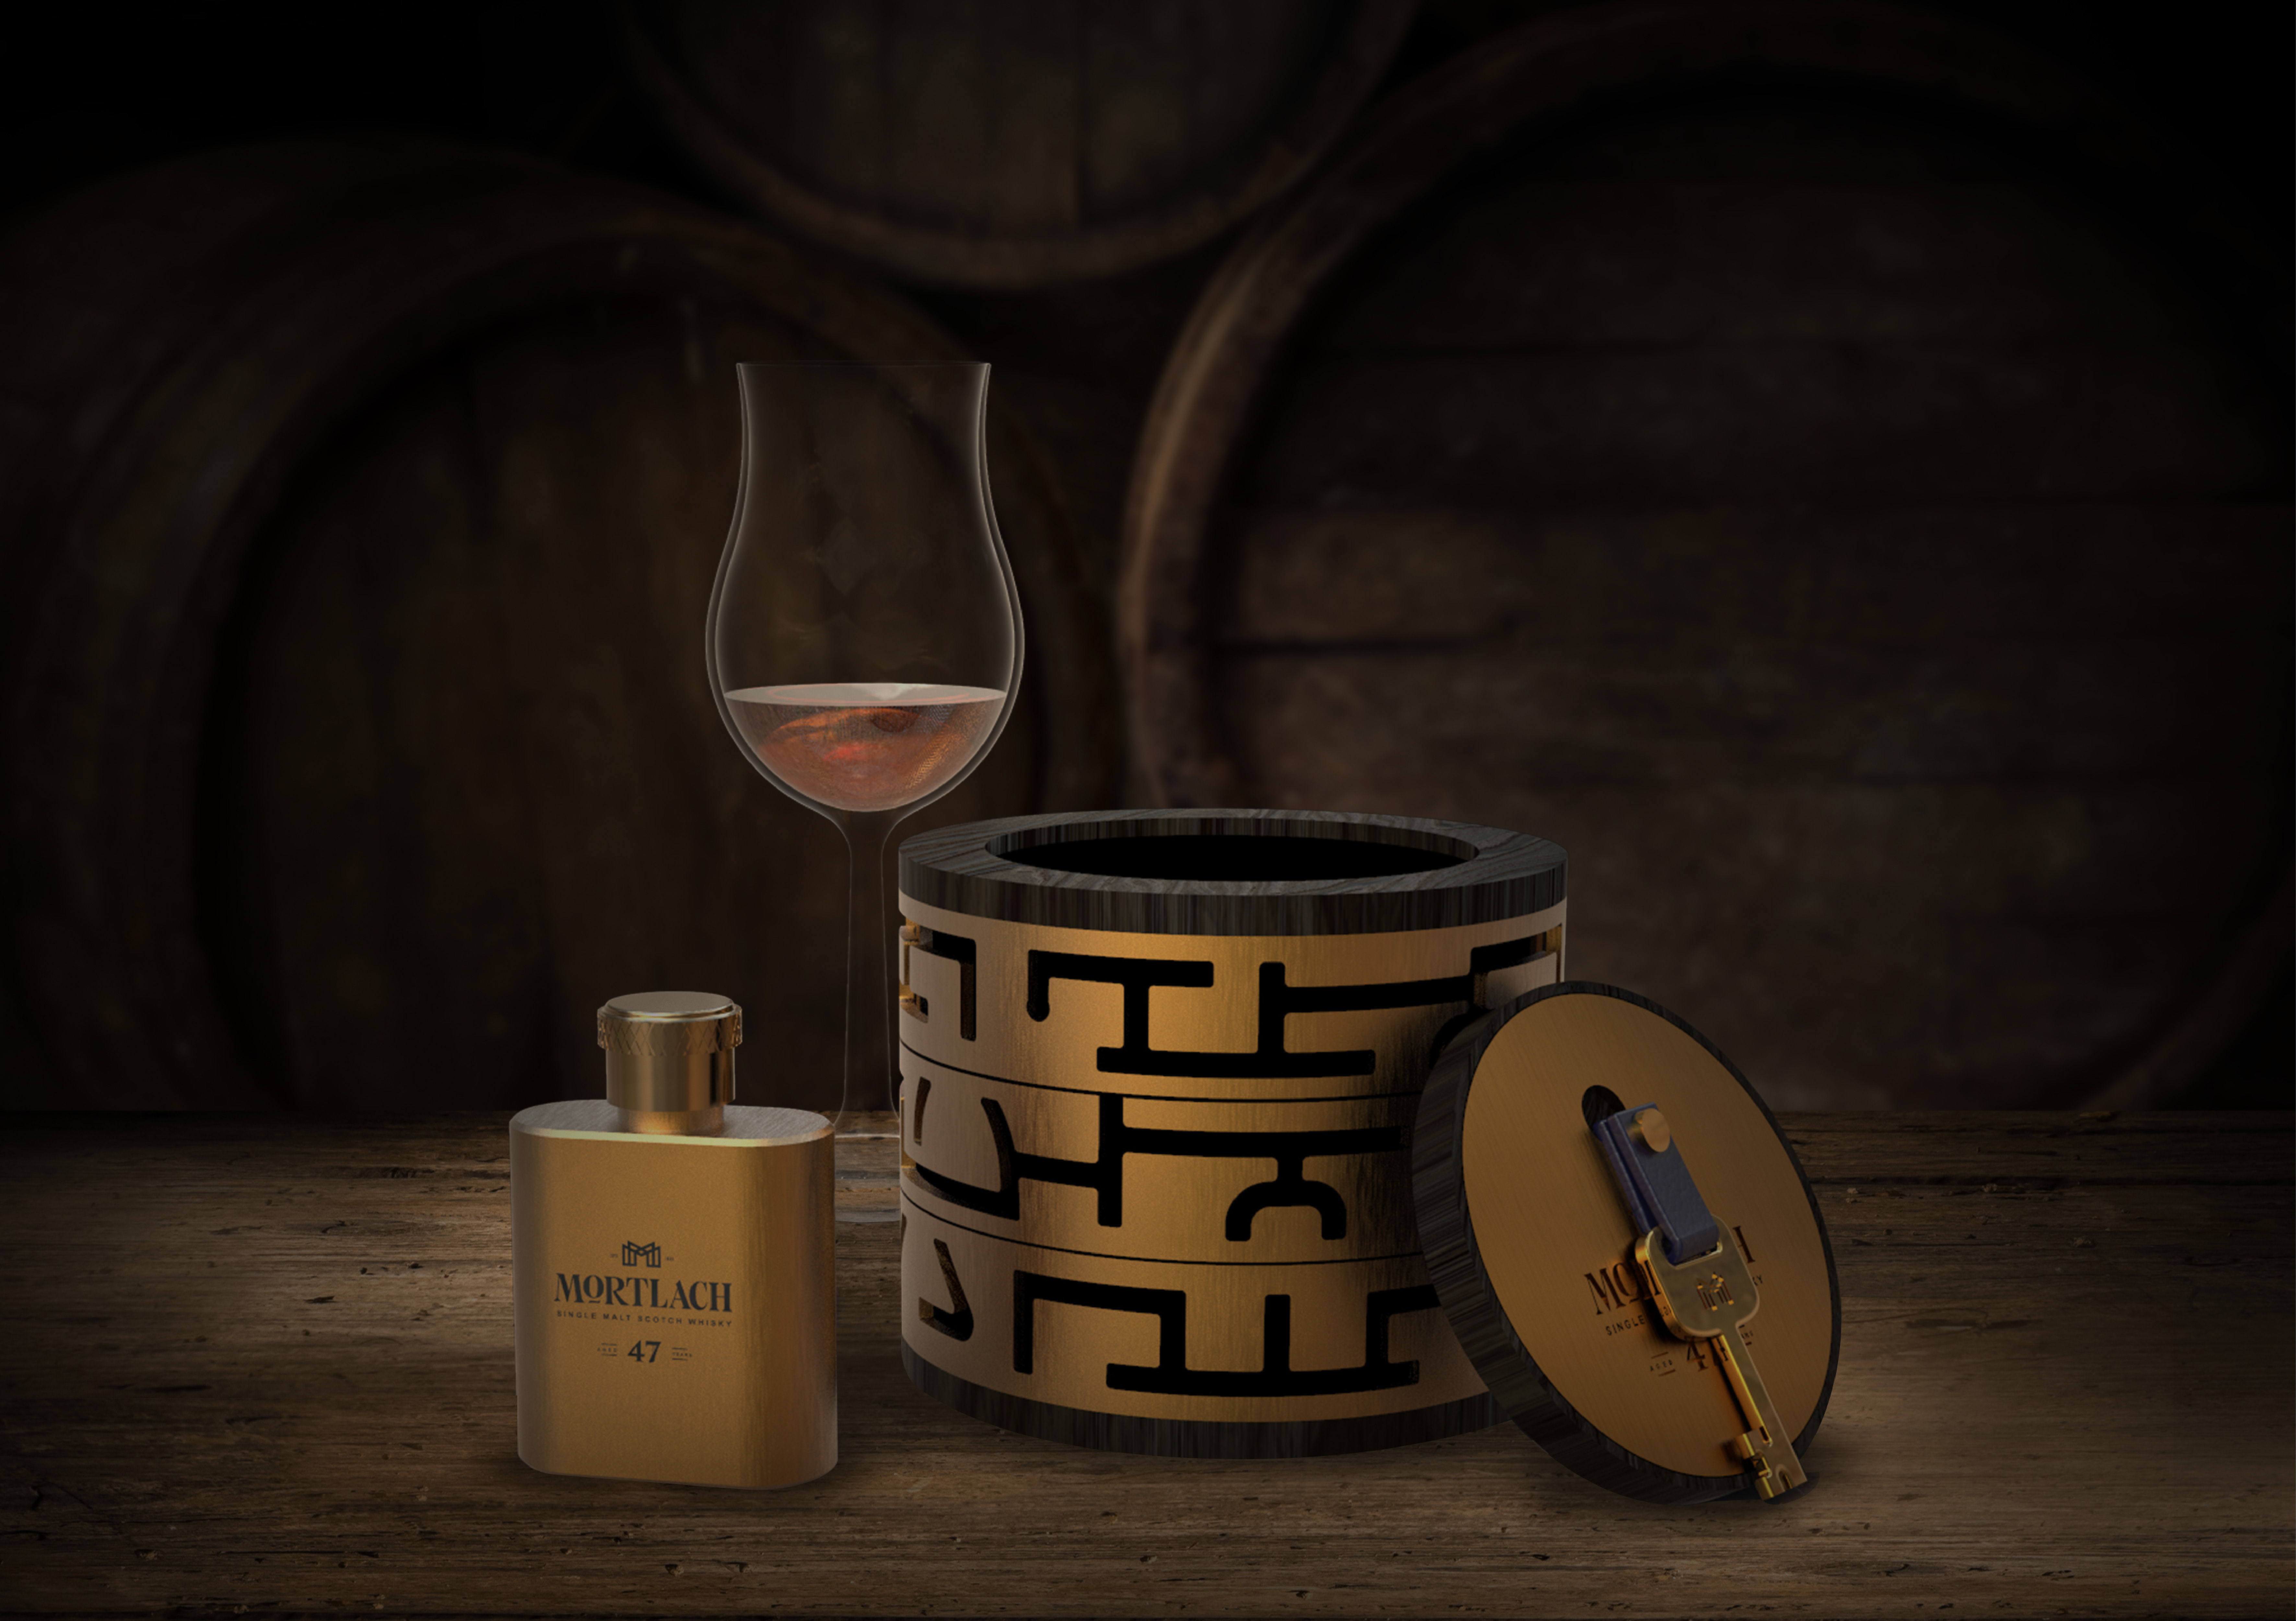 MUSE Design Winners - Mortlach 2.81 whisky - Interactively Decryption Box